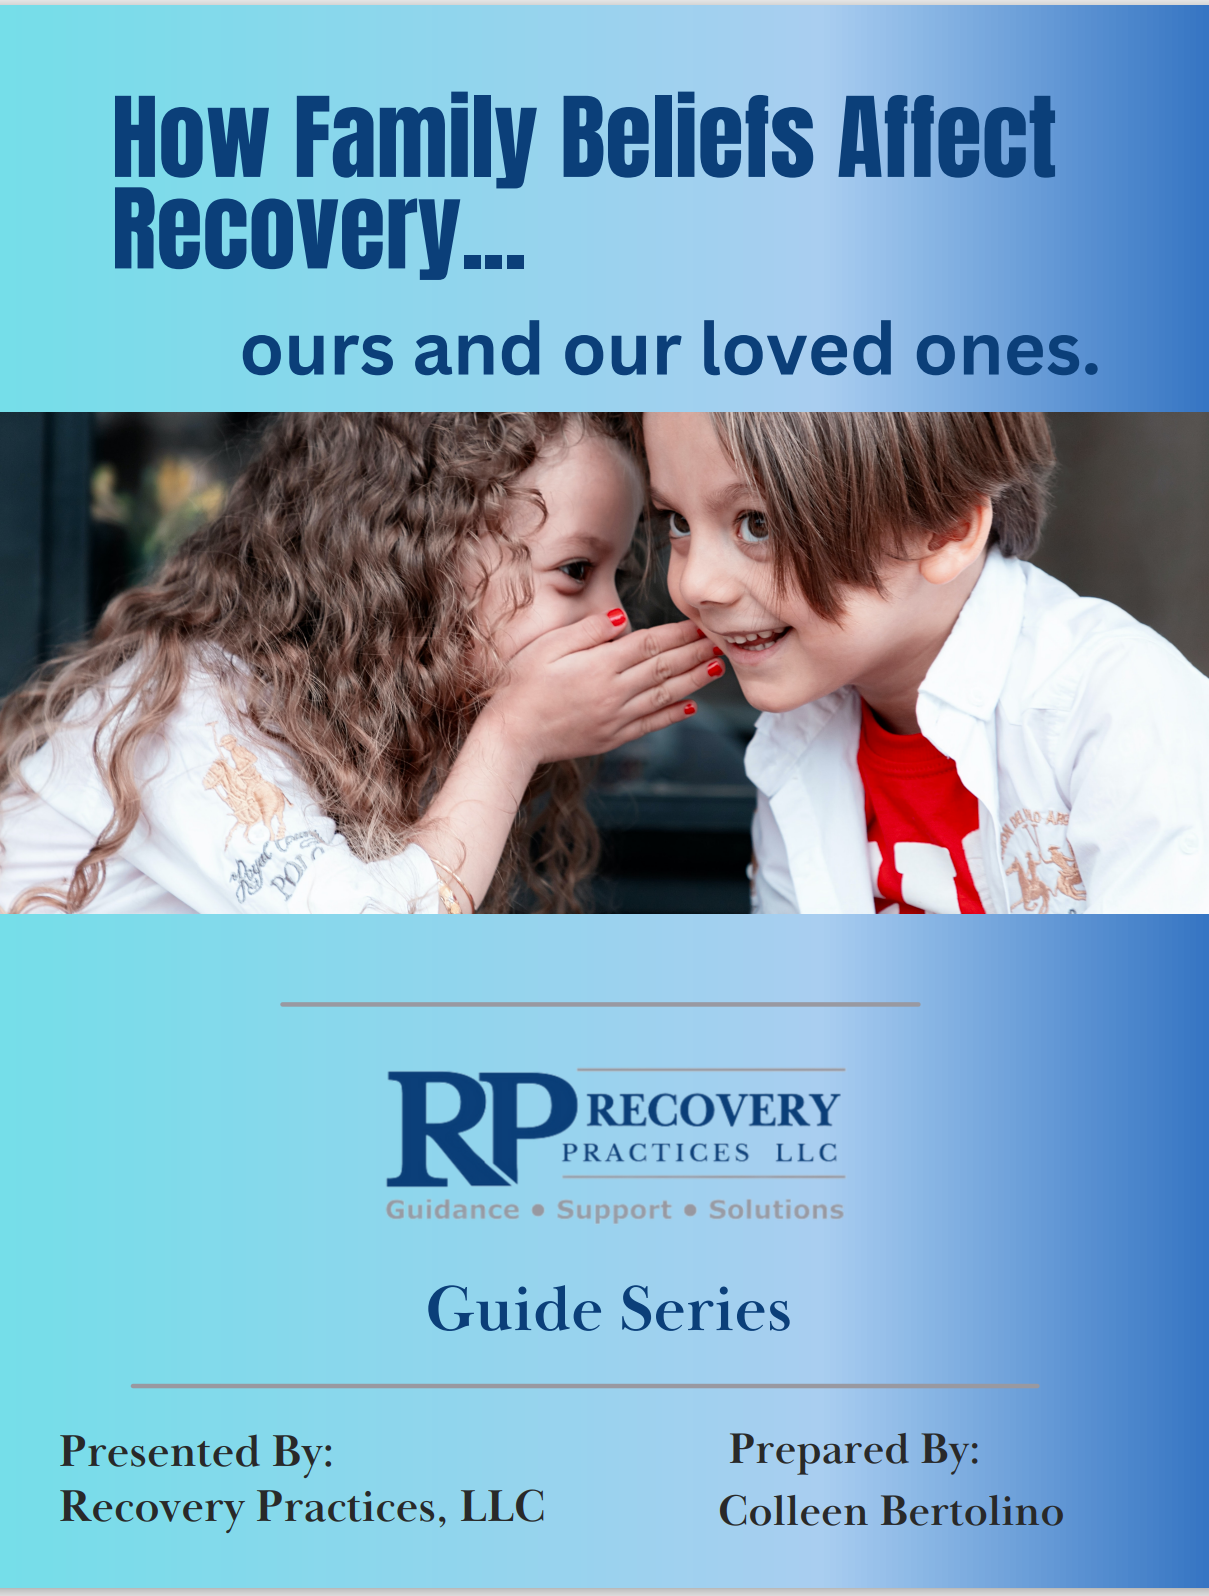 How Family Beliefs Affect Recovery